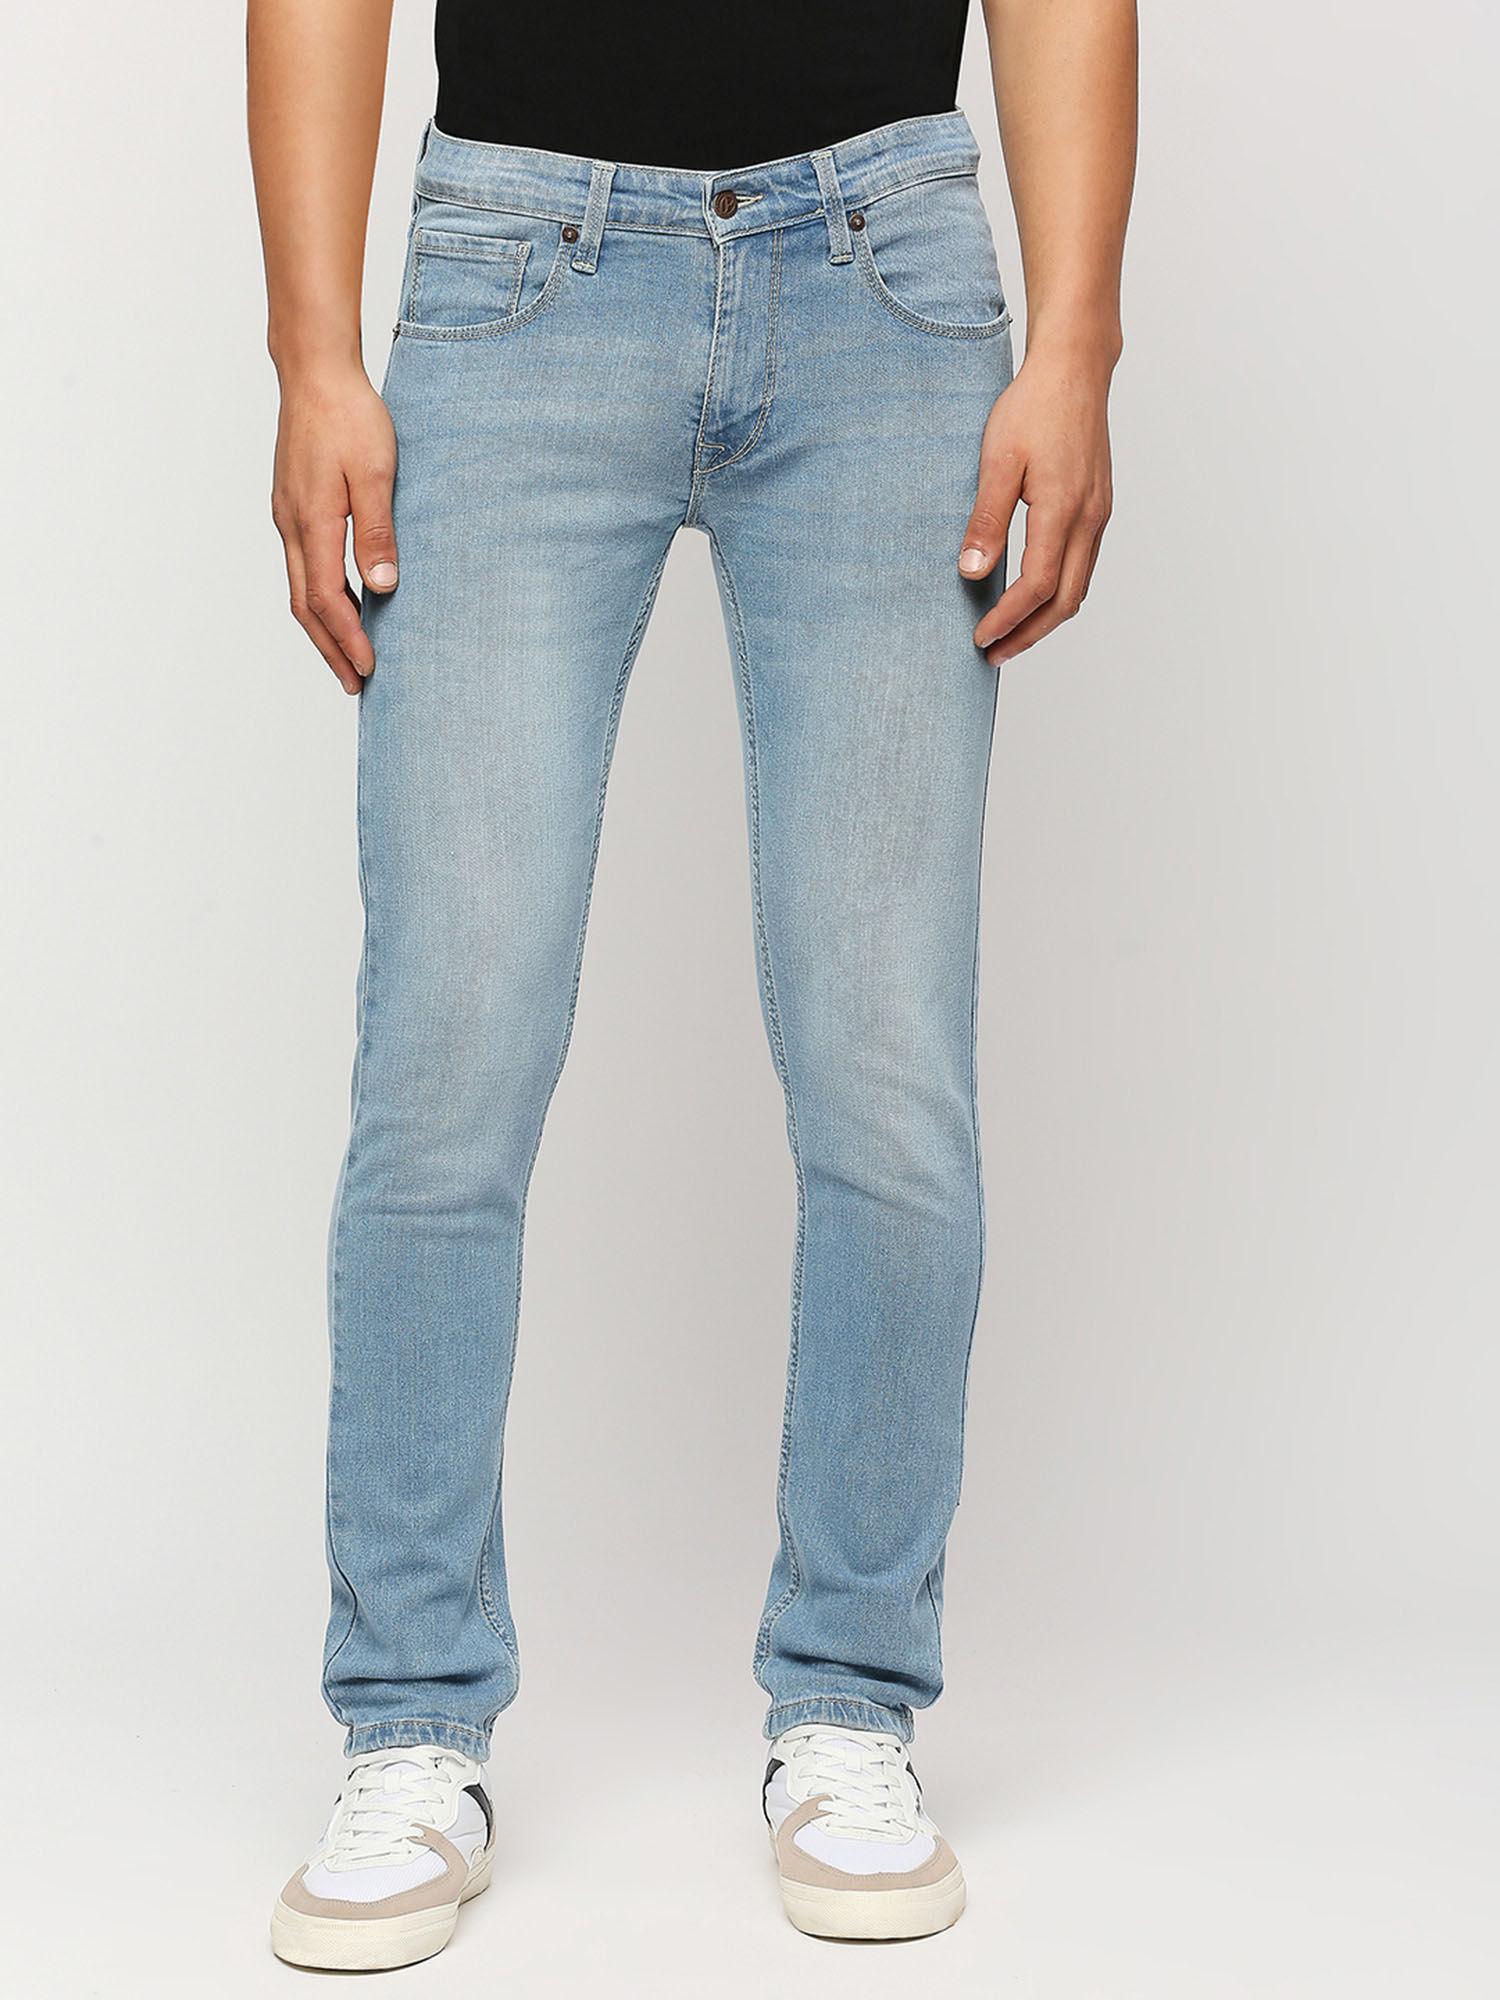 vapour-tapered-fit-low-waist-jeans-light-blue